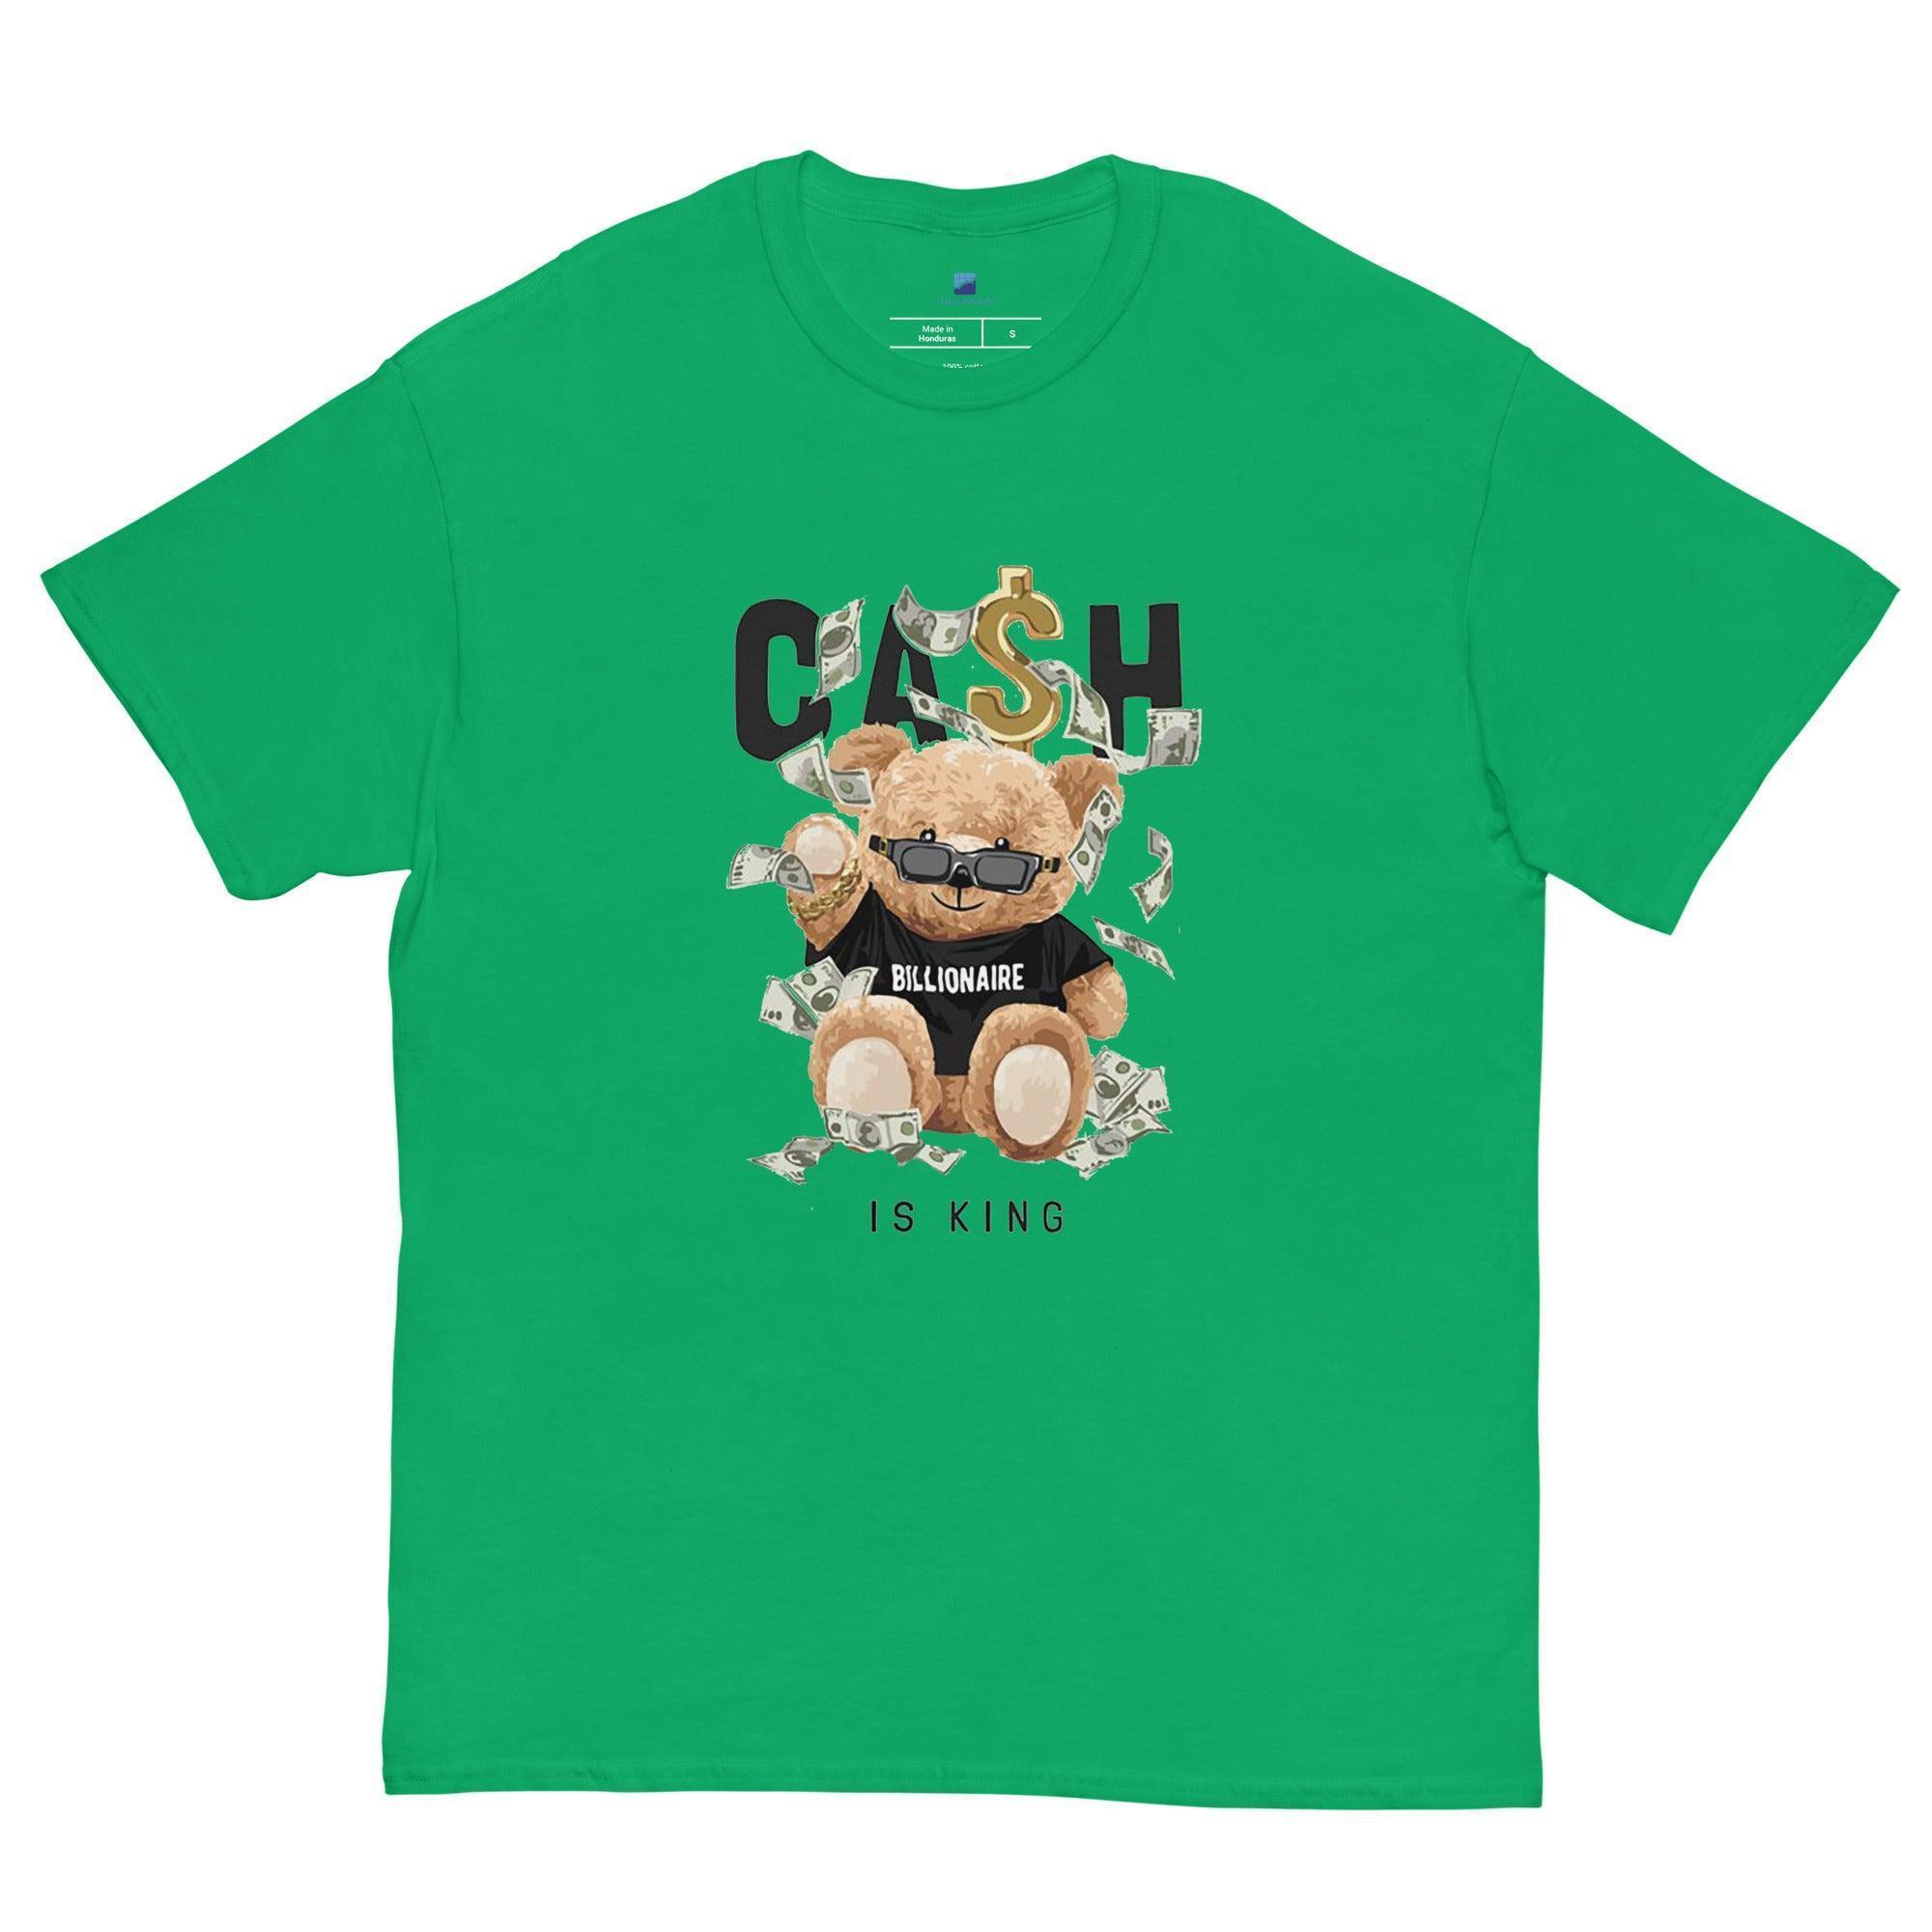 Cash Is King T-Shirt - InvestmenTees